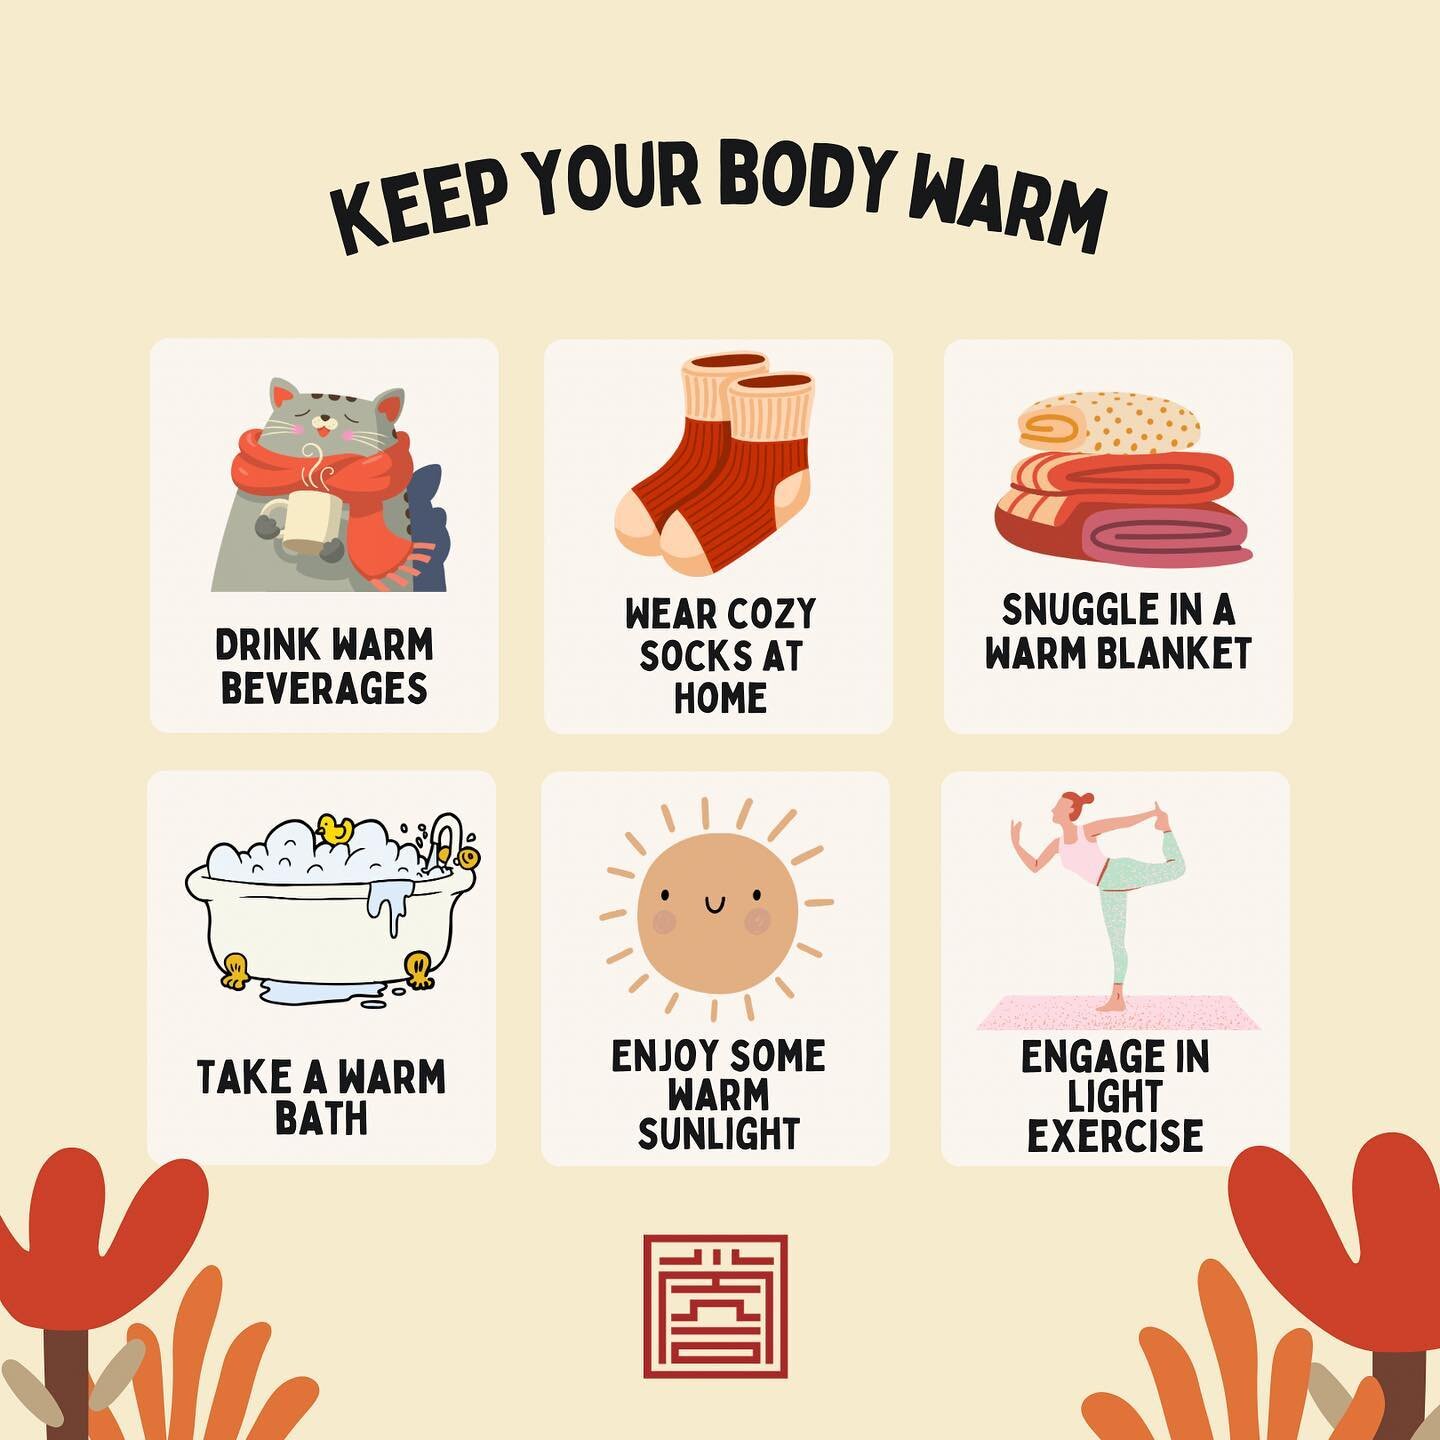 TCM emphasizes on maintaining balance and harmony within the body, and keeping the body warm is considered important for overall wellness, helping you with your body&rsquo;s circulation. 𝗖𝗼𝗻𝘁𝗮𝗰𝘁 𝘂𝘀 ✨
📞 Phone: +1 (689) 698-9800
📩 Email: sup